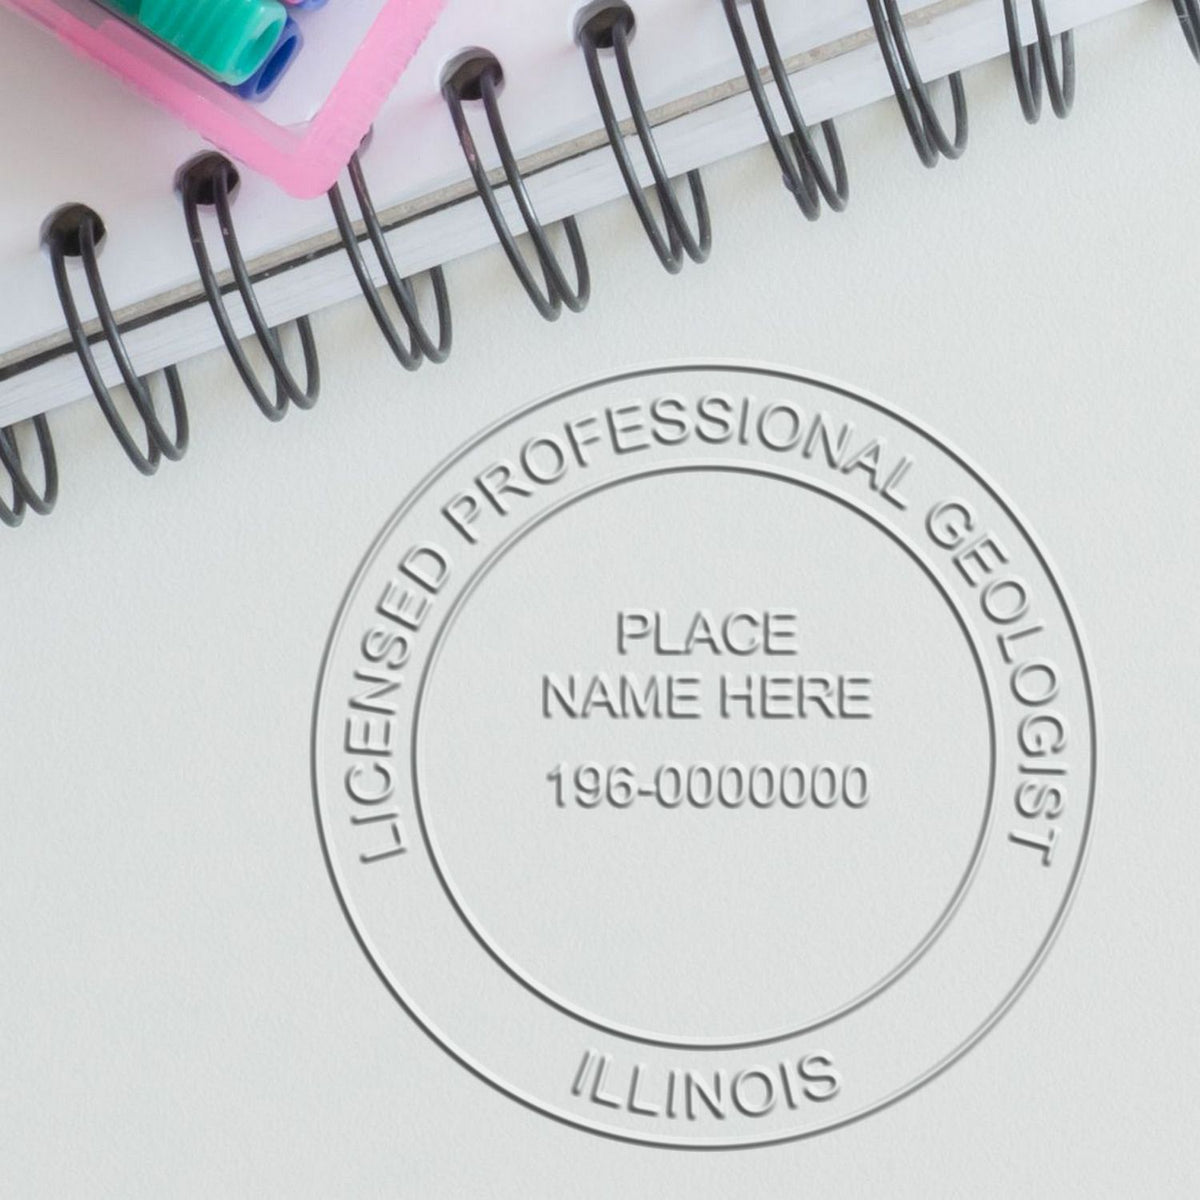 A photograph of the Soft Illinois Professional Geologist Seal stamp impression reveals a vivid, professional image of the on paper.